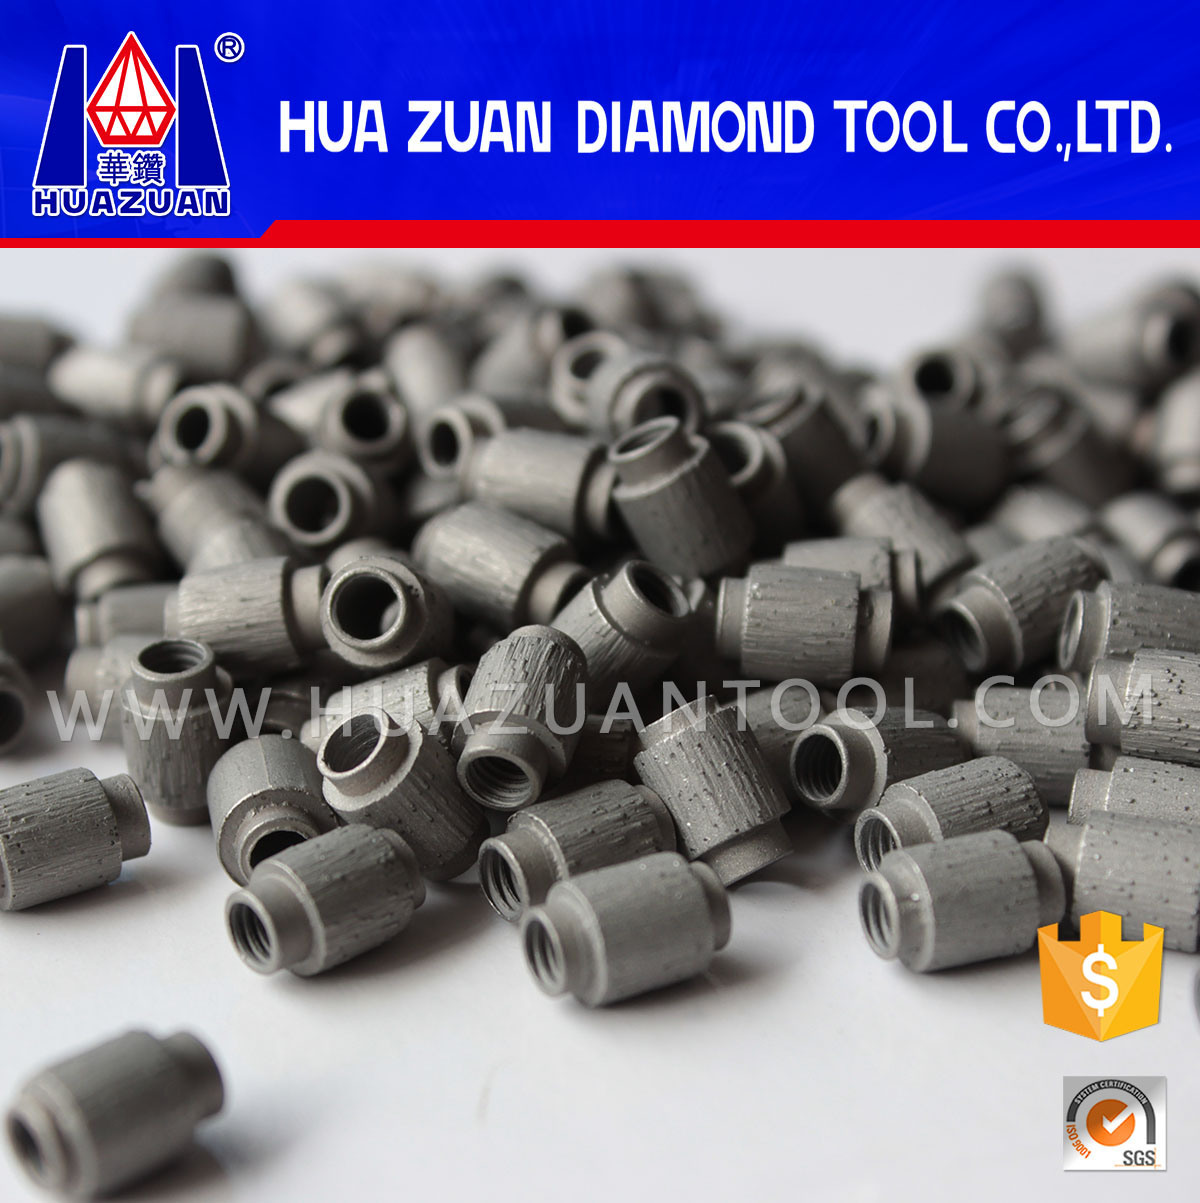 Wholesale Sintered Diamond Wire Saw Beads for Granite